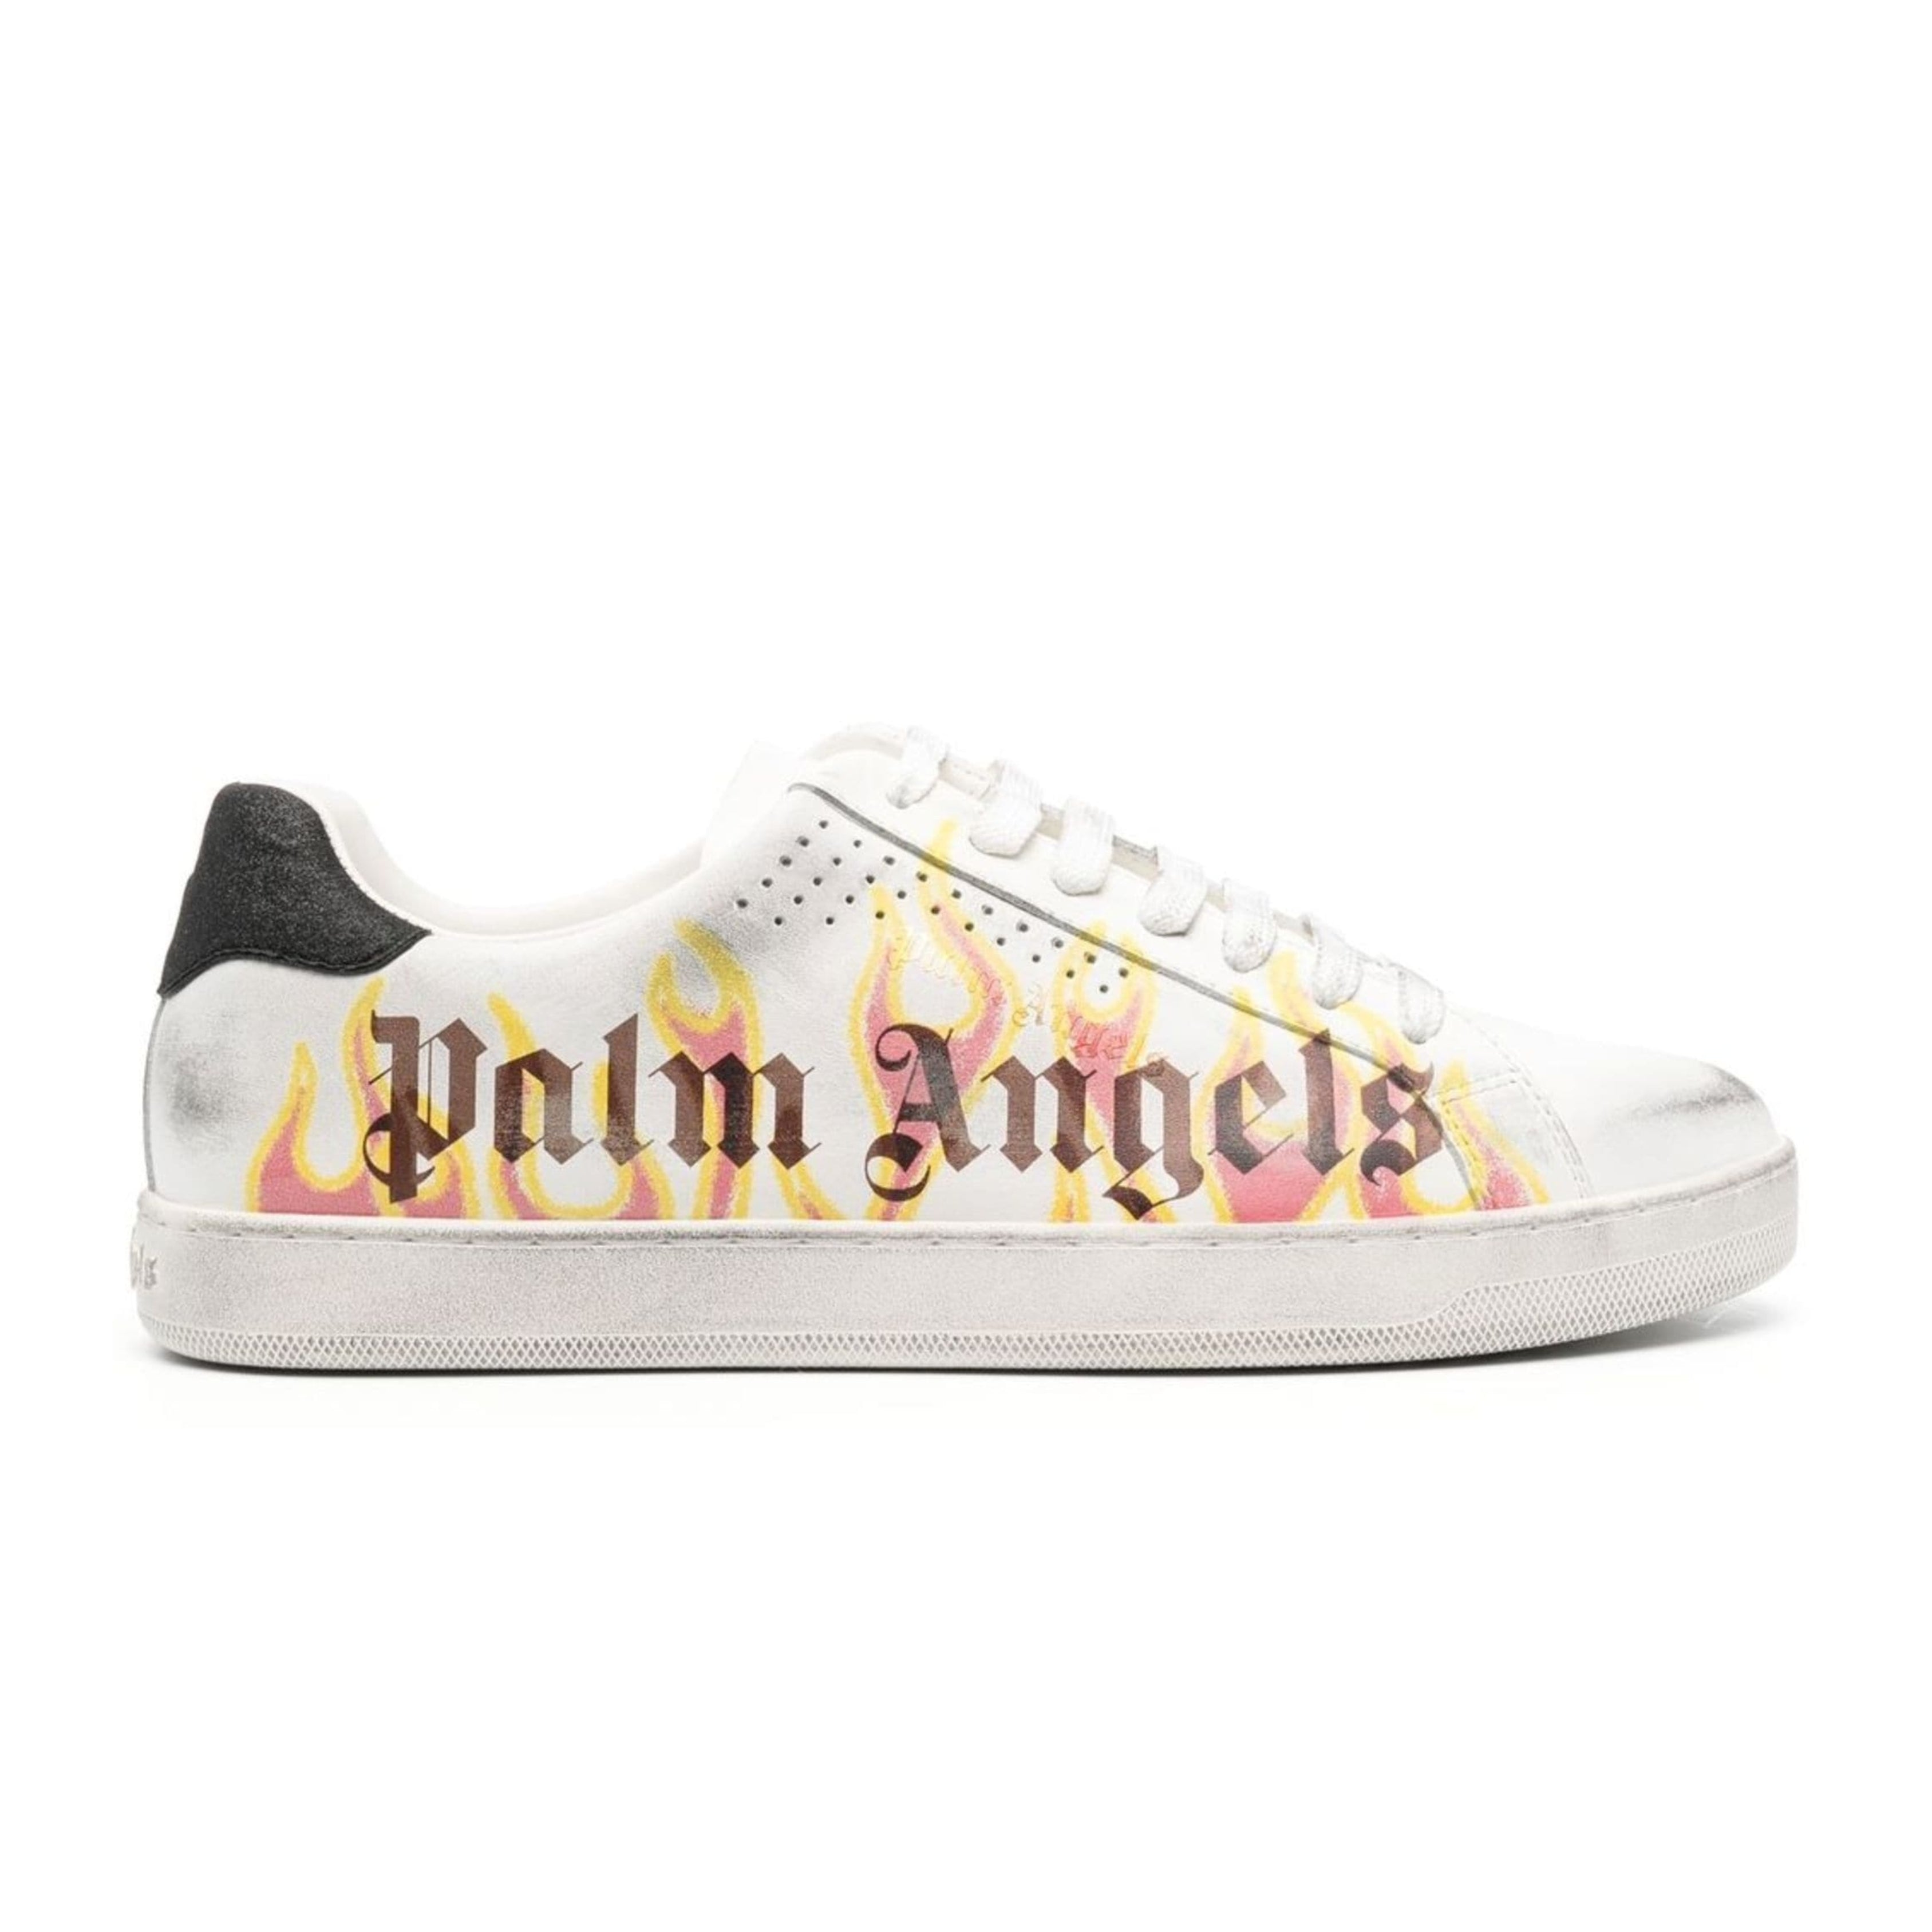 Palm Angels Sneakers Low Spray Paint